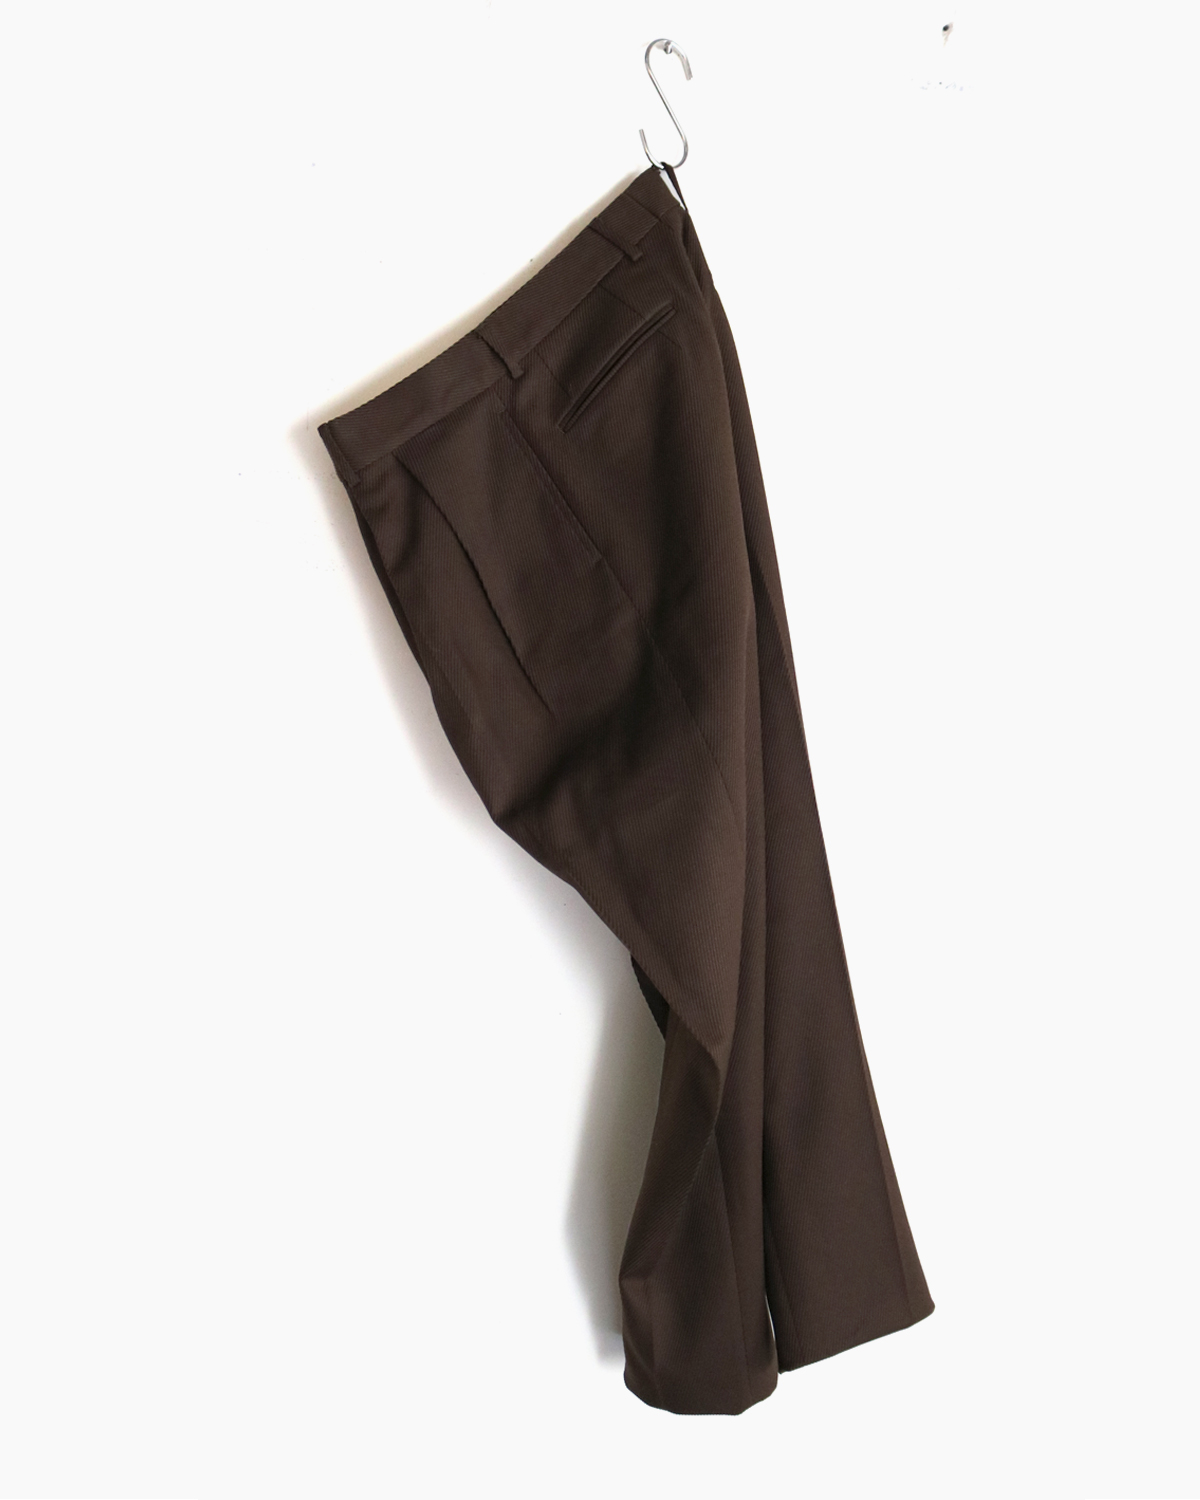 NEAT｜Cotton Kersey｜Brown - Tapered｜PRODUCT｜Continuer Inc 